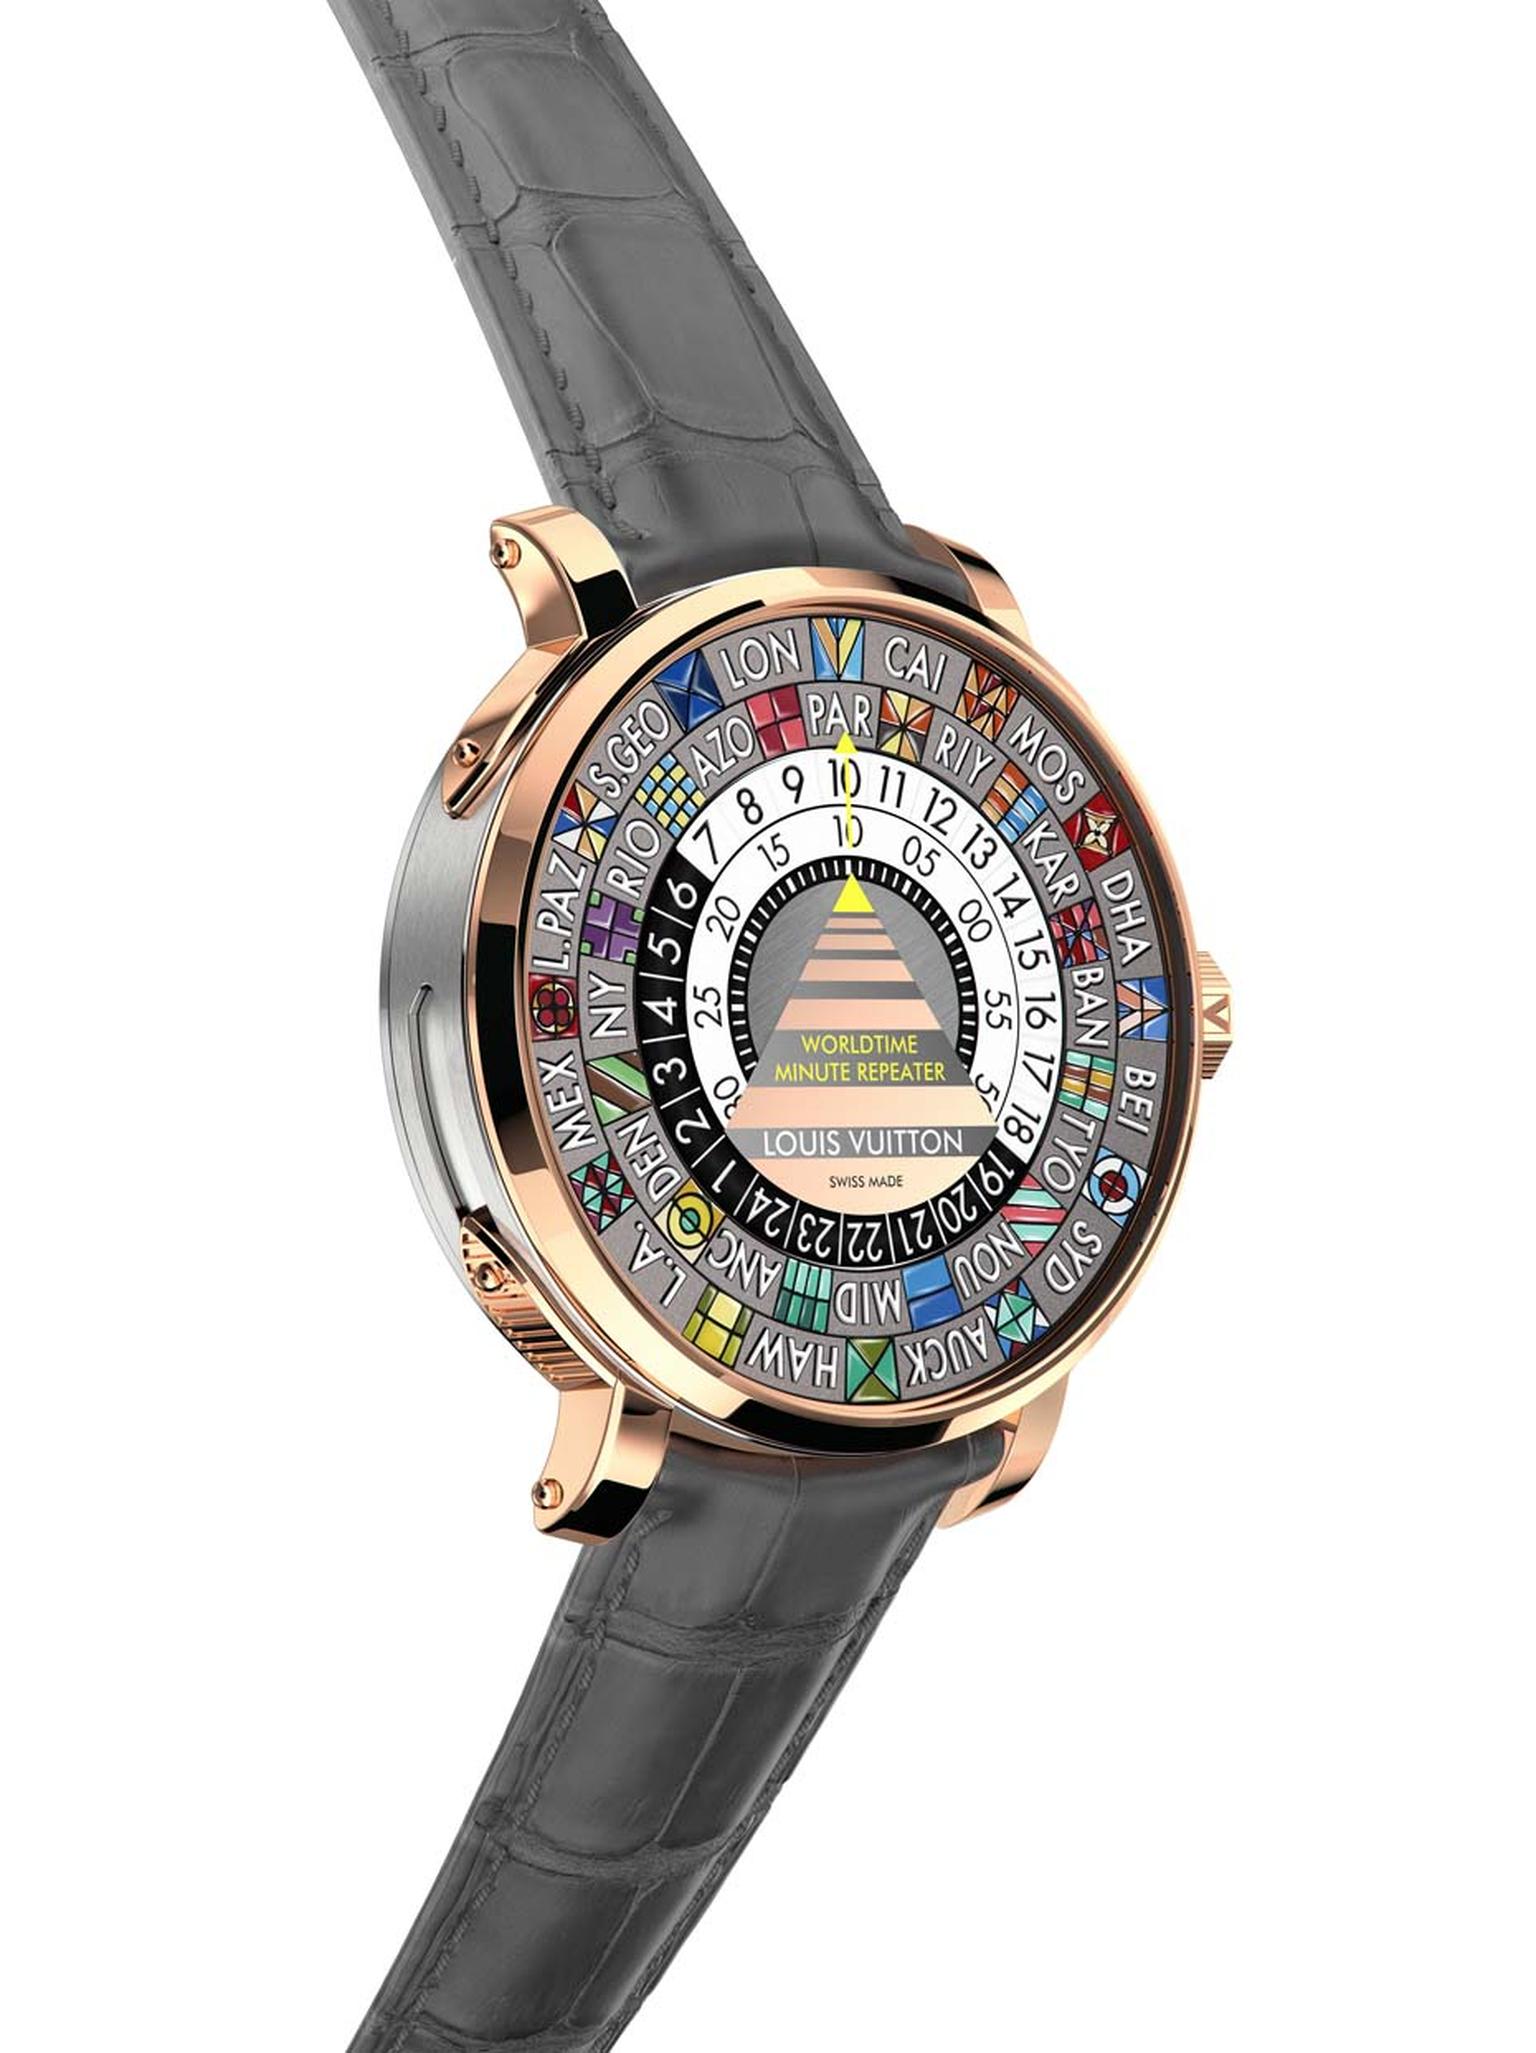 The Louis Vuitton Worldtime Minute Repeater features a